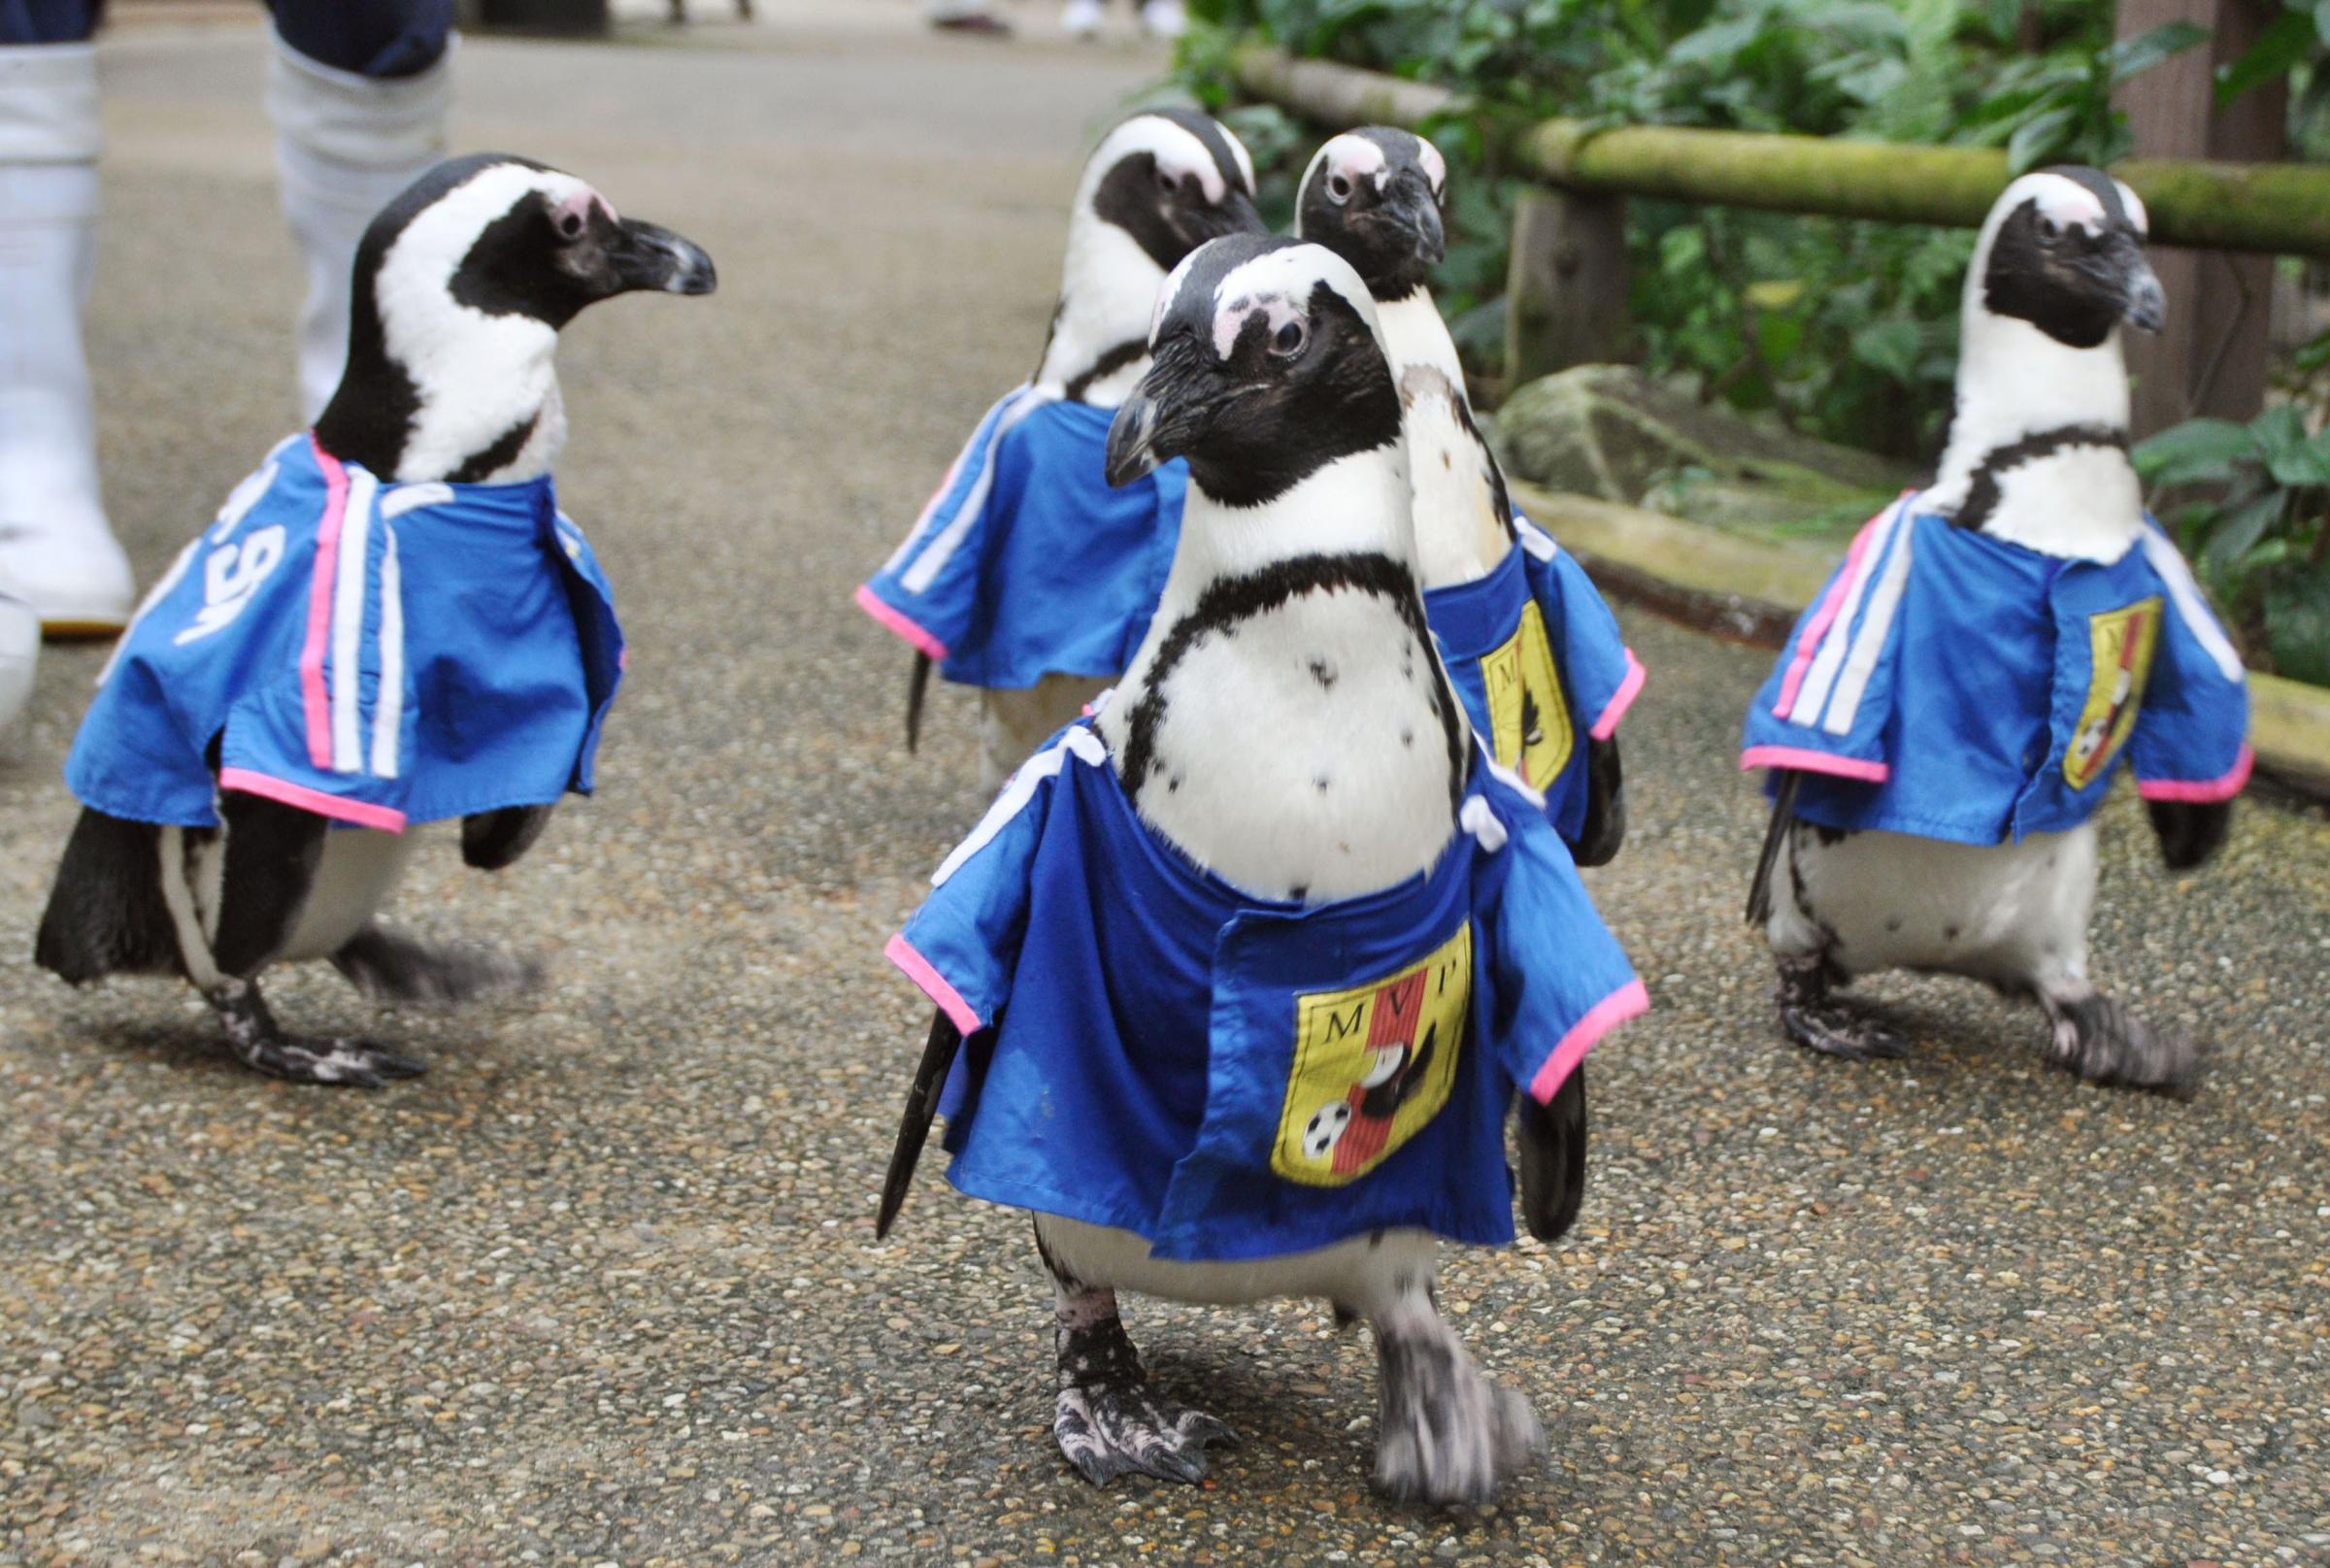 Penguins, each wearing a uniform similar to the jersey of Japan's national football team, walk in Matsue Vogel Park in Matsue, Japan, on June 11, 2014.